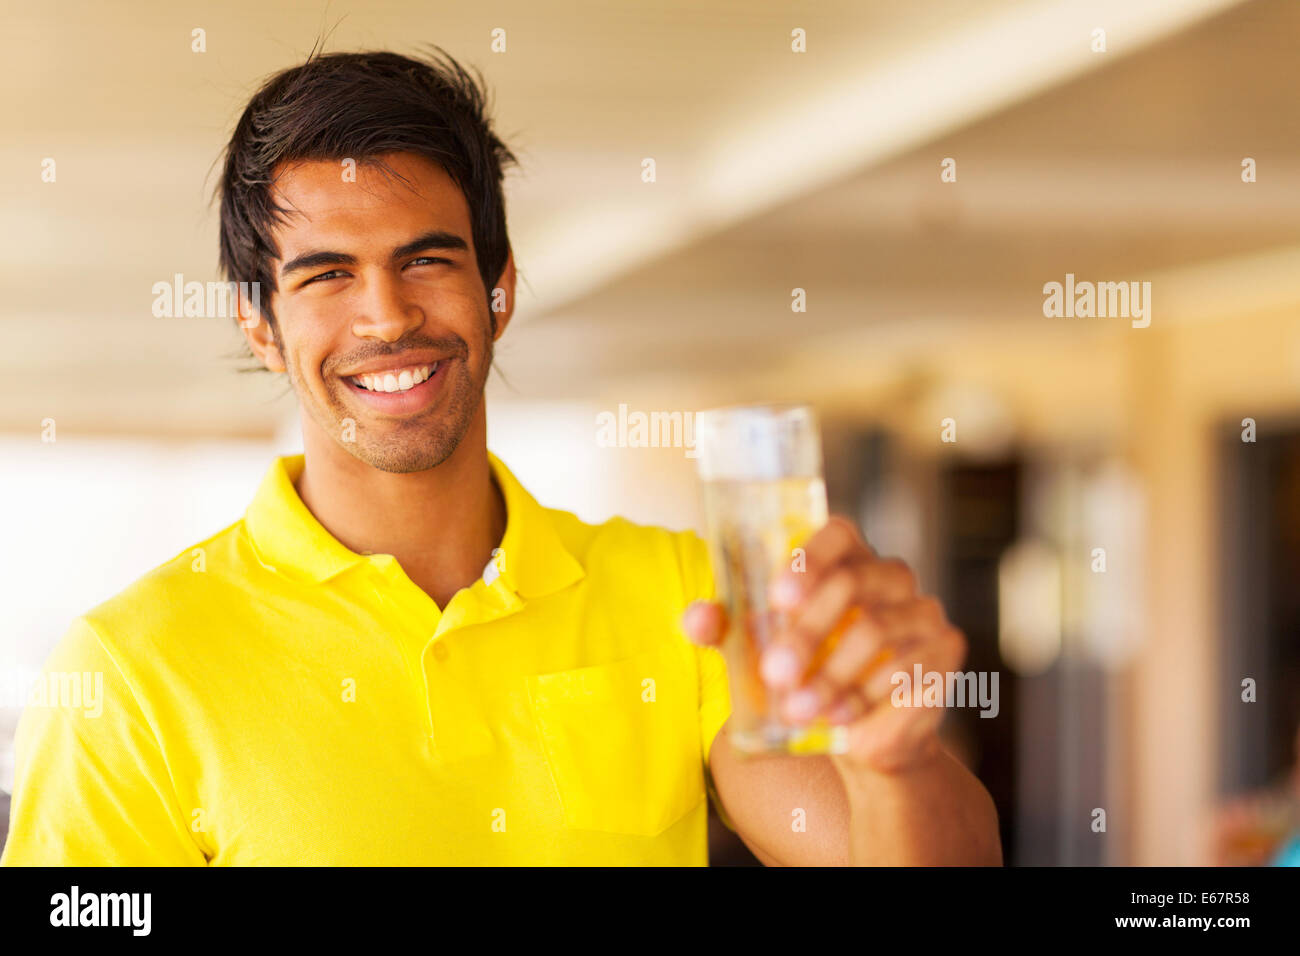 cheerful young Indian man propose a toast Stock Photo